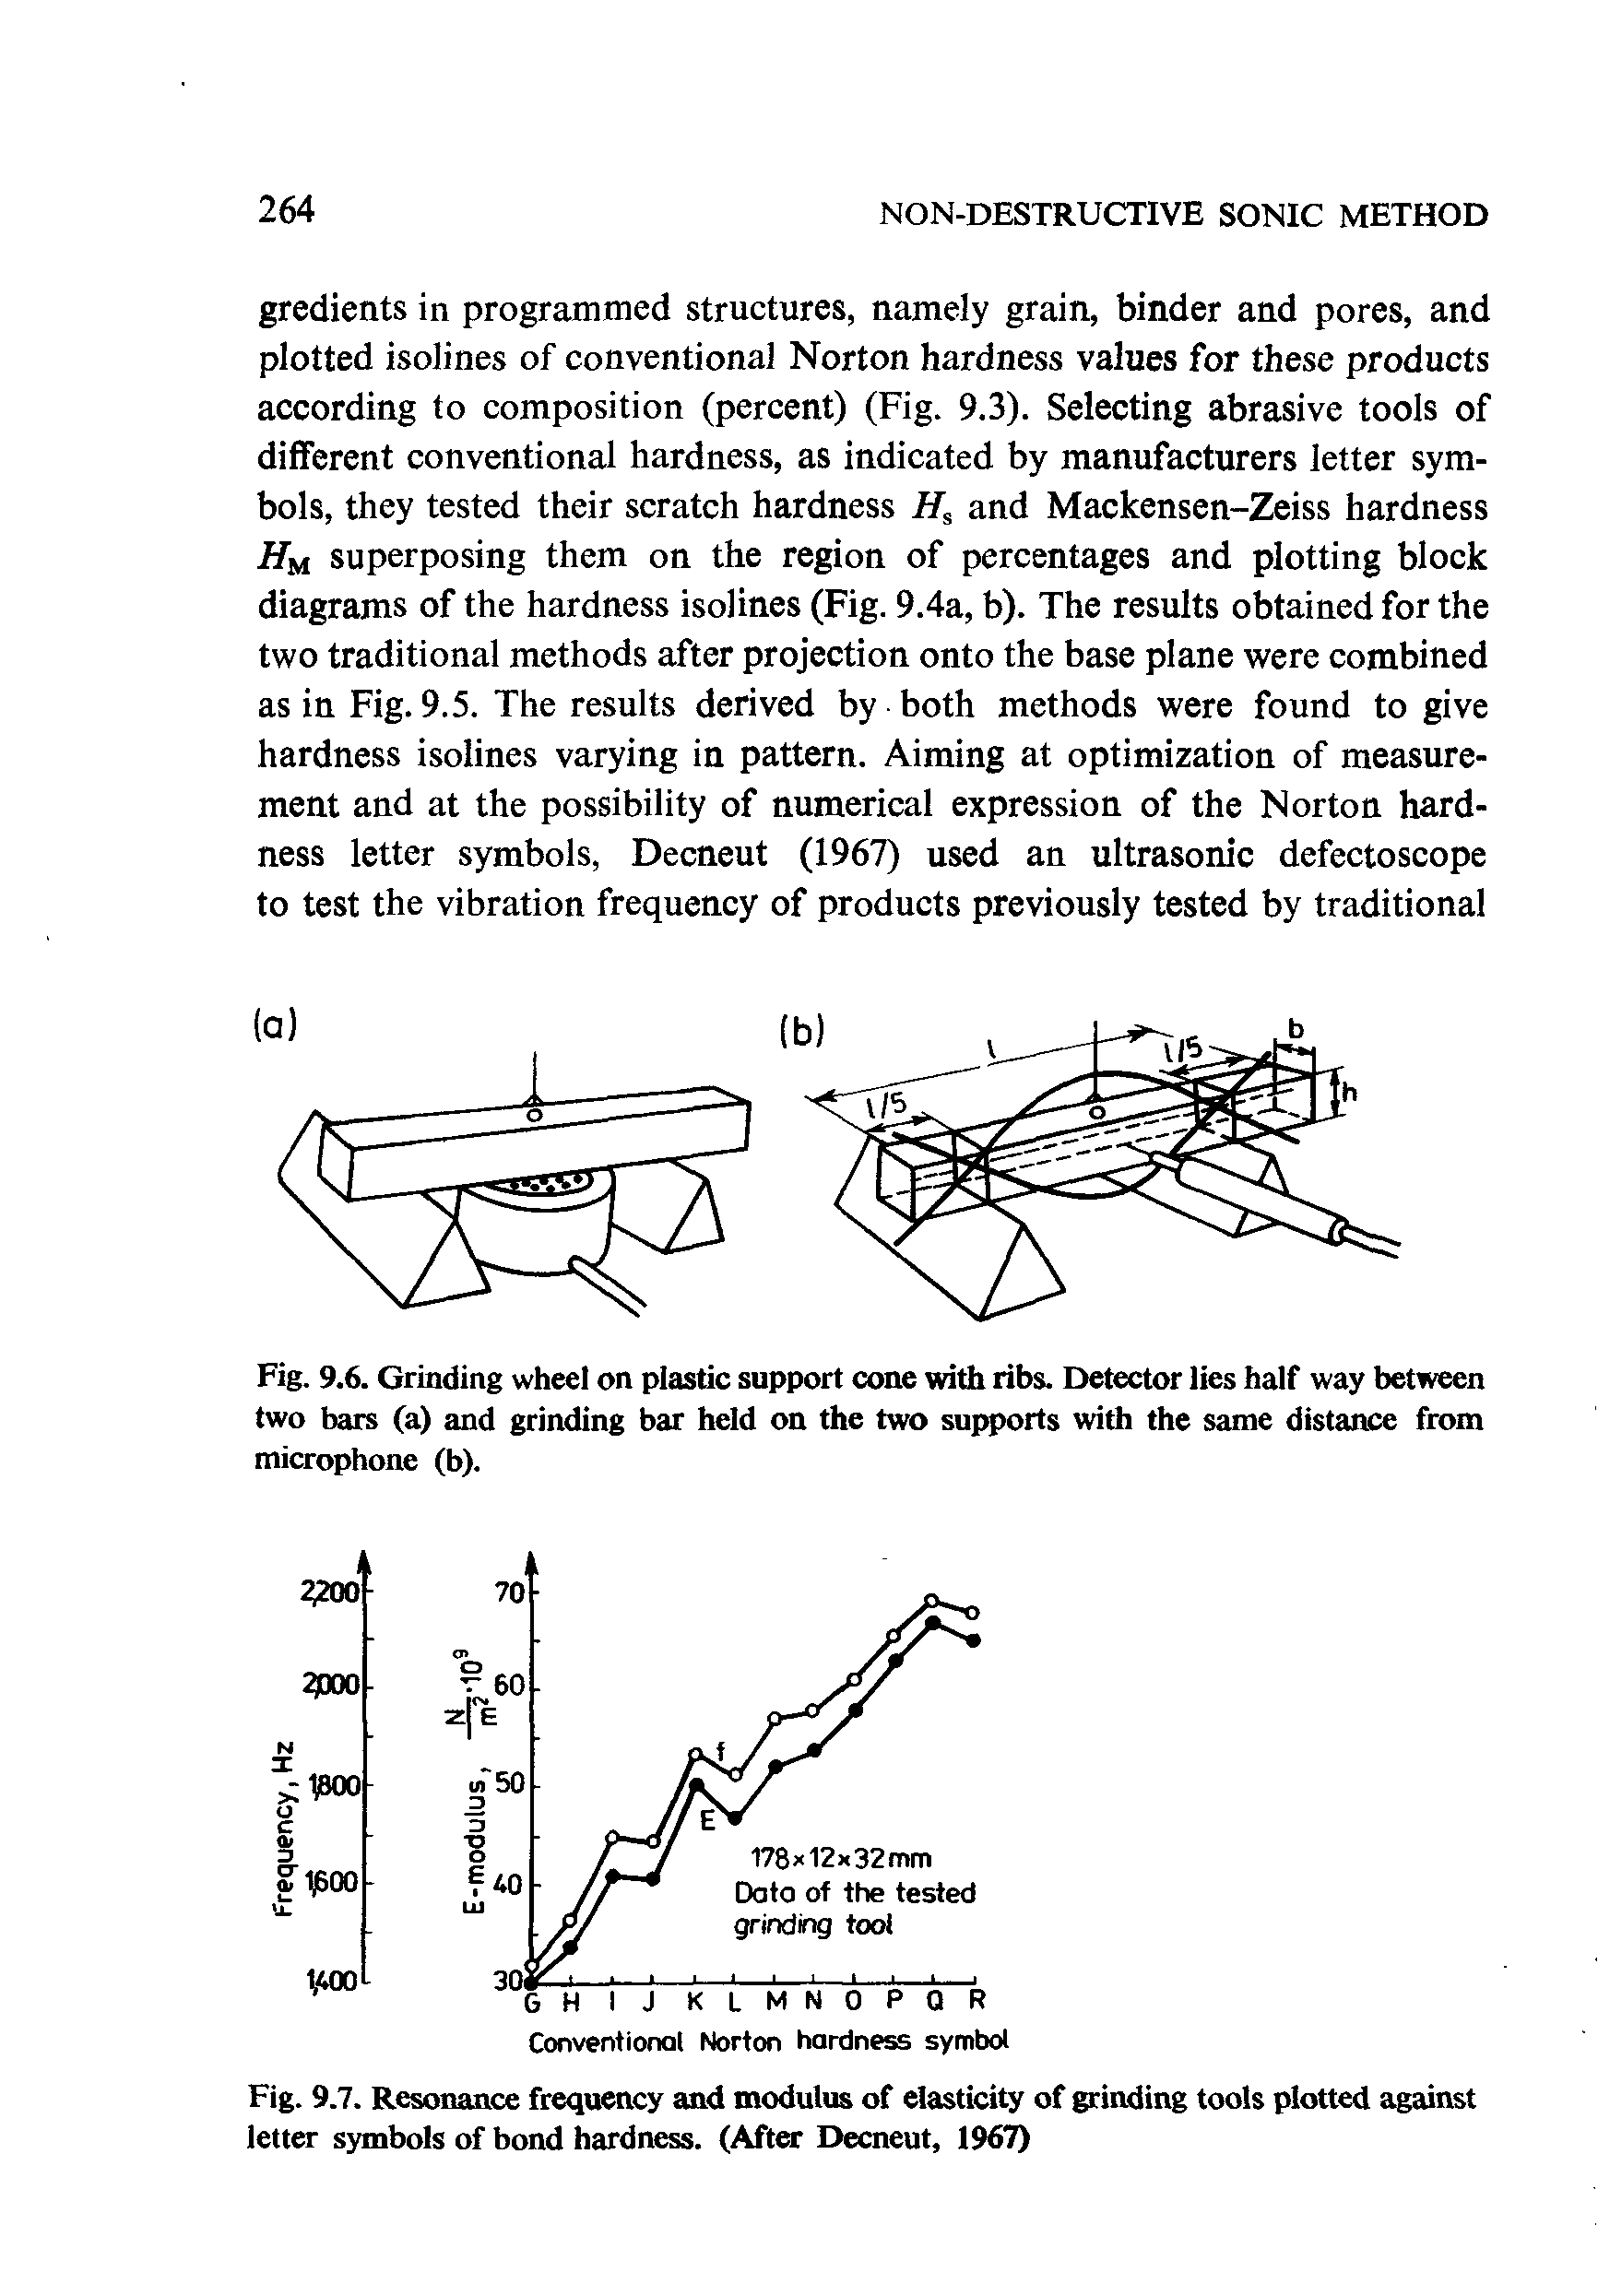 Fig. 9.7. Resonance frequency and modulus of elasticity of grinding tools plotted against letter symbols of bond hardness. (After Decneut, 1967)...